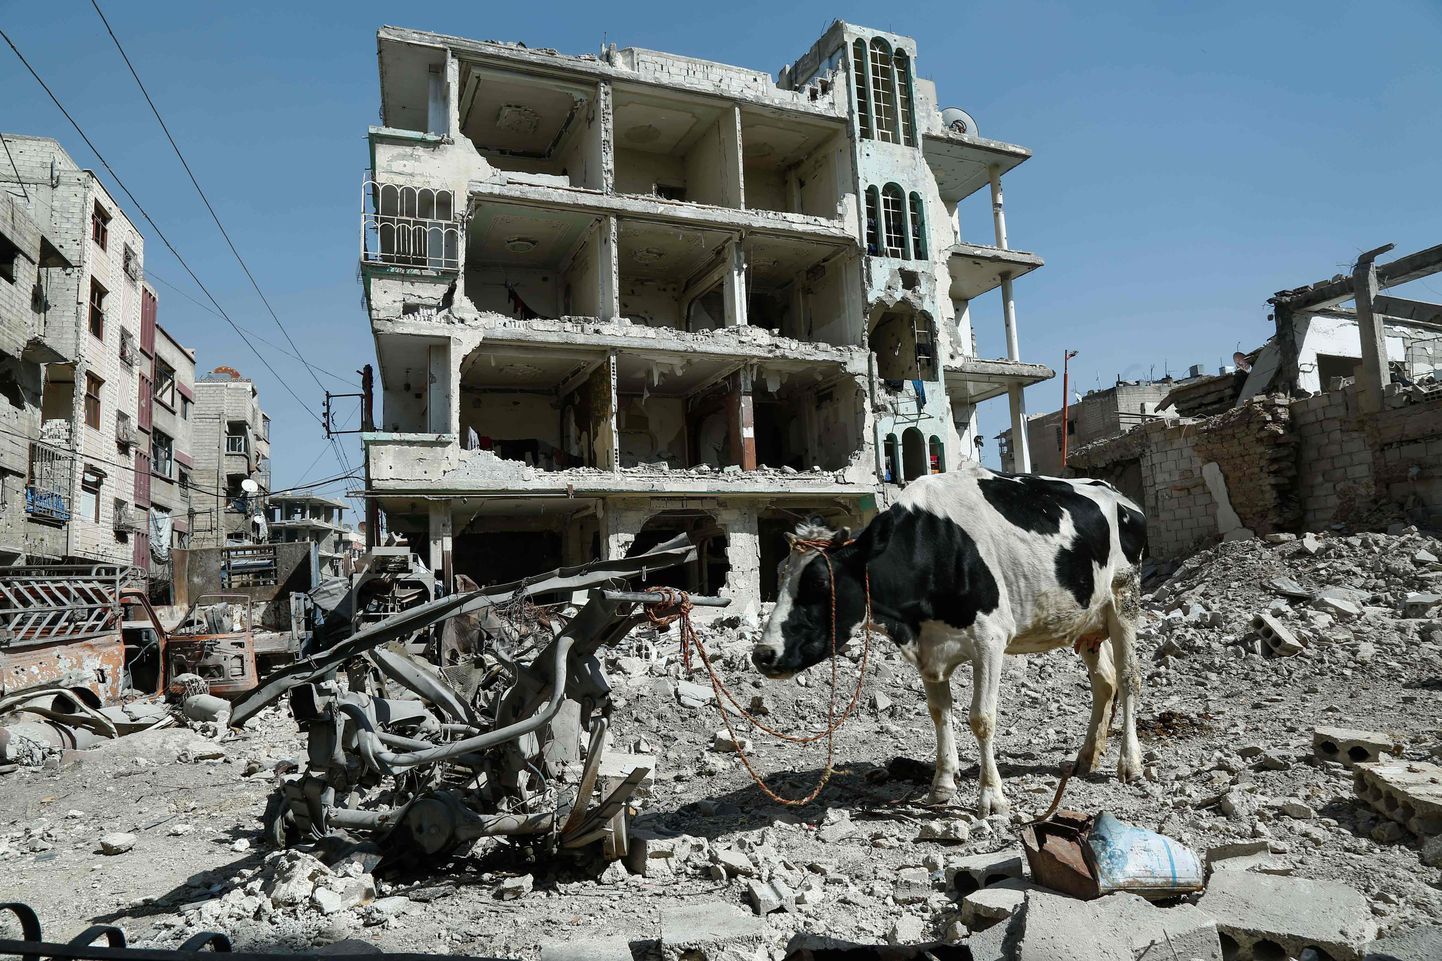 A cow is seen attached to scrap metal near destroyed buildings in Douma, in the rebel enclave of Eastern Ghouta on the outskirts of Damascus on March 12, 2018.
Syria's regime pressed its relentless offensive on Eastern Ghouta as diplomats at the United Nations pushed for new efforts to end the "bloodbath" in the rebel enclave. / AFP PHOTO / HASAN MOHAMED